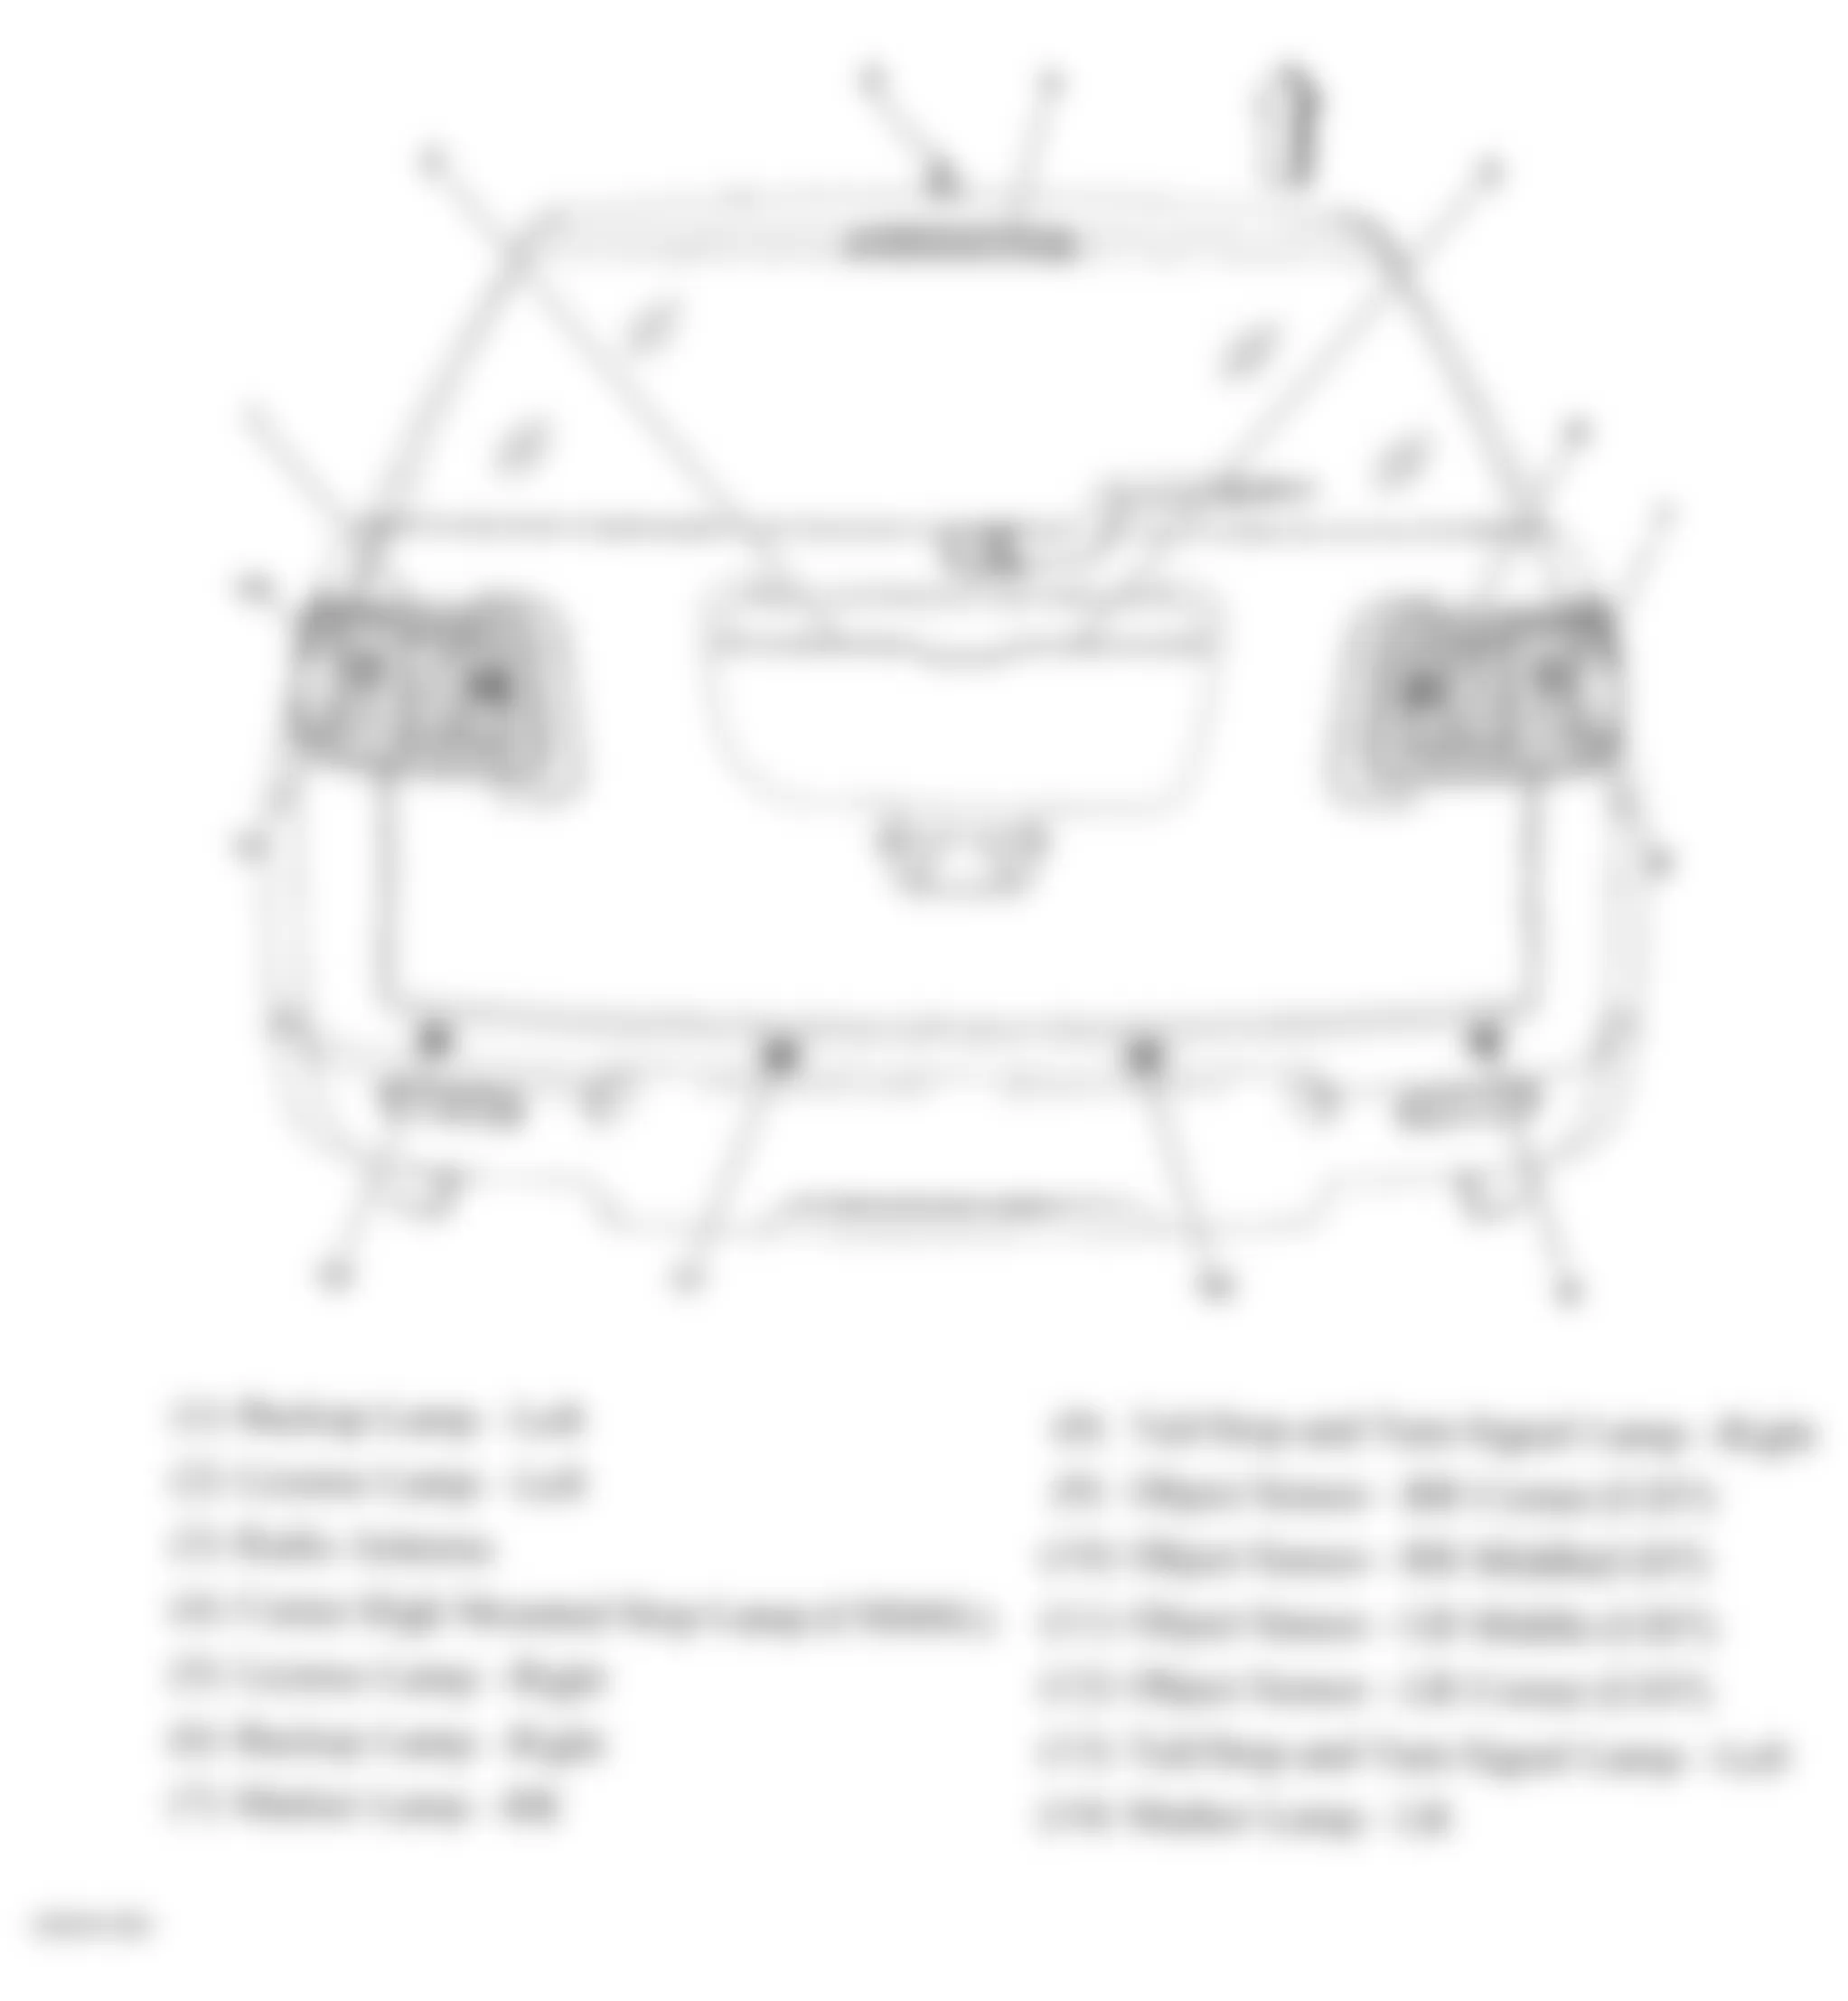 Buick Enclave CX 2008 - Component Locations -  Rear Of Vehicle (Acadia & Outlook)